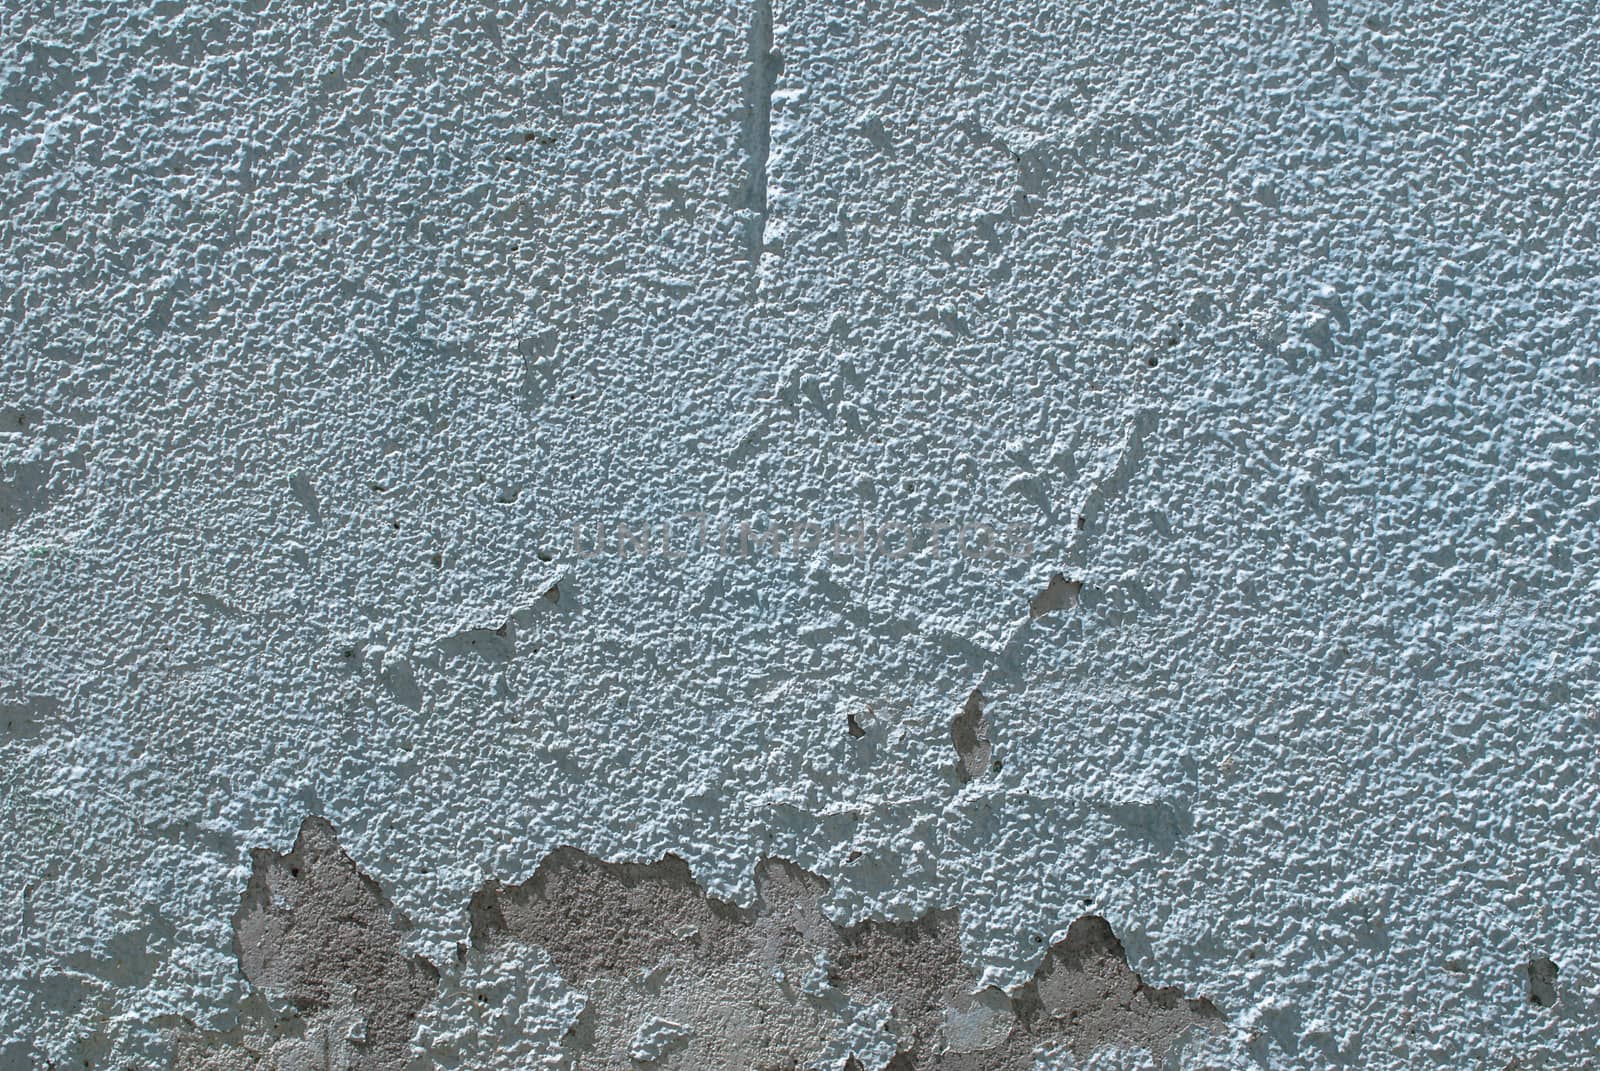 old chipped plaster on the concrete wall, landscape style, grunge concrete surface, great background or texture by uvisni